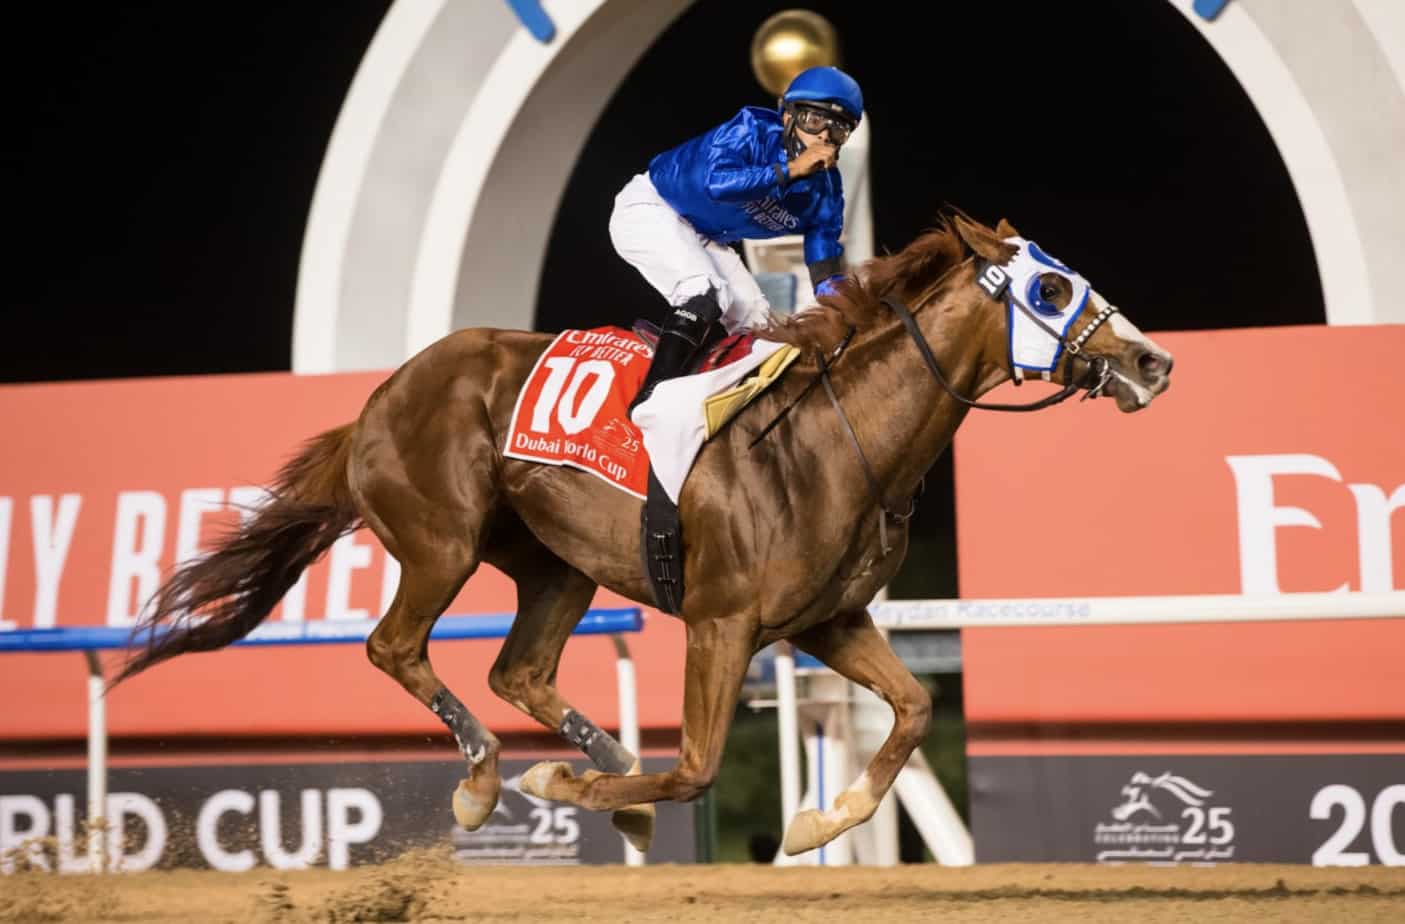 Dubai World Cup Night 2022 – Preview and Betting Odds